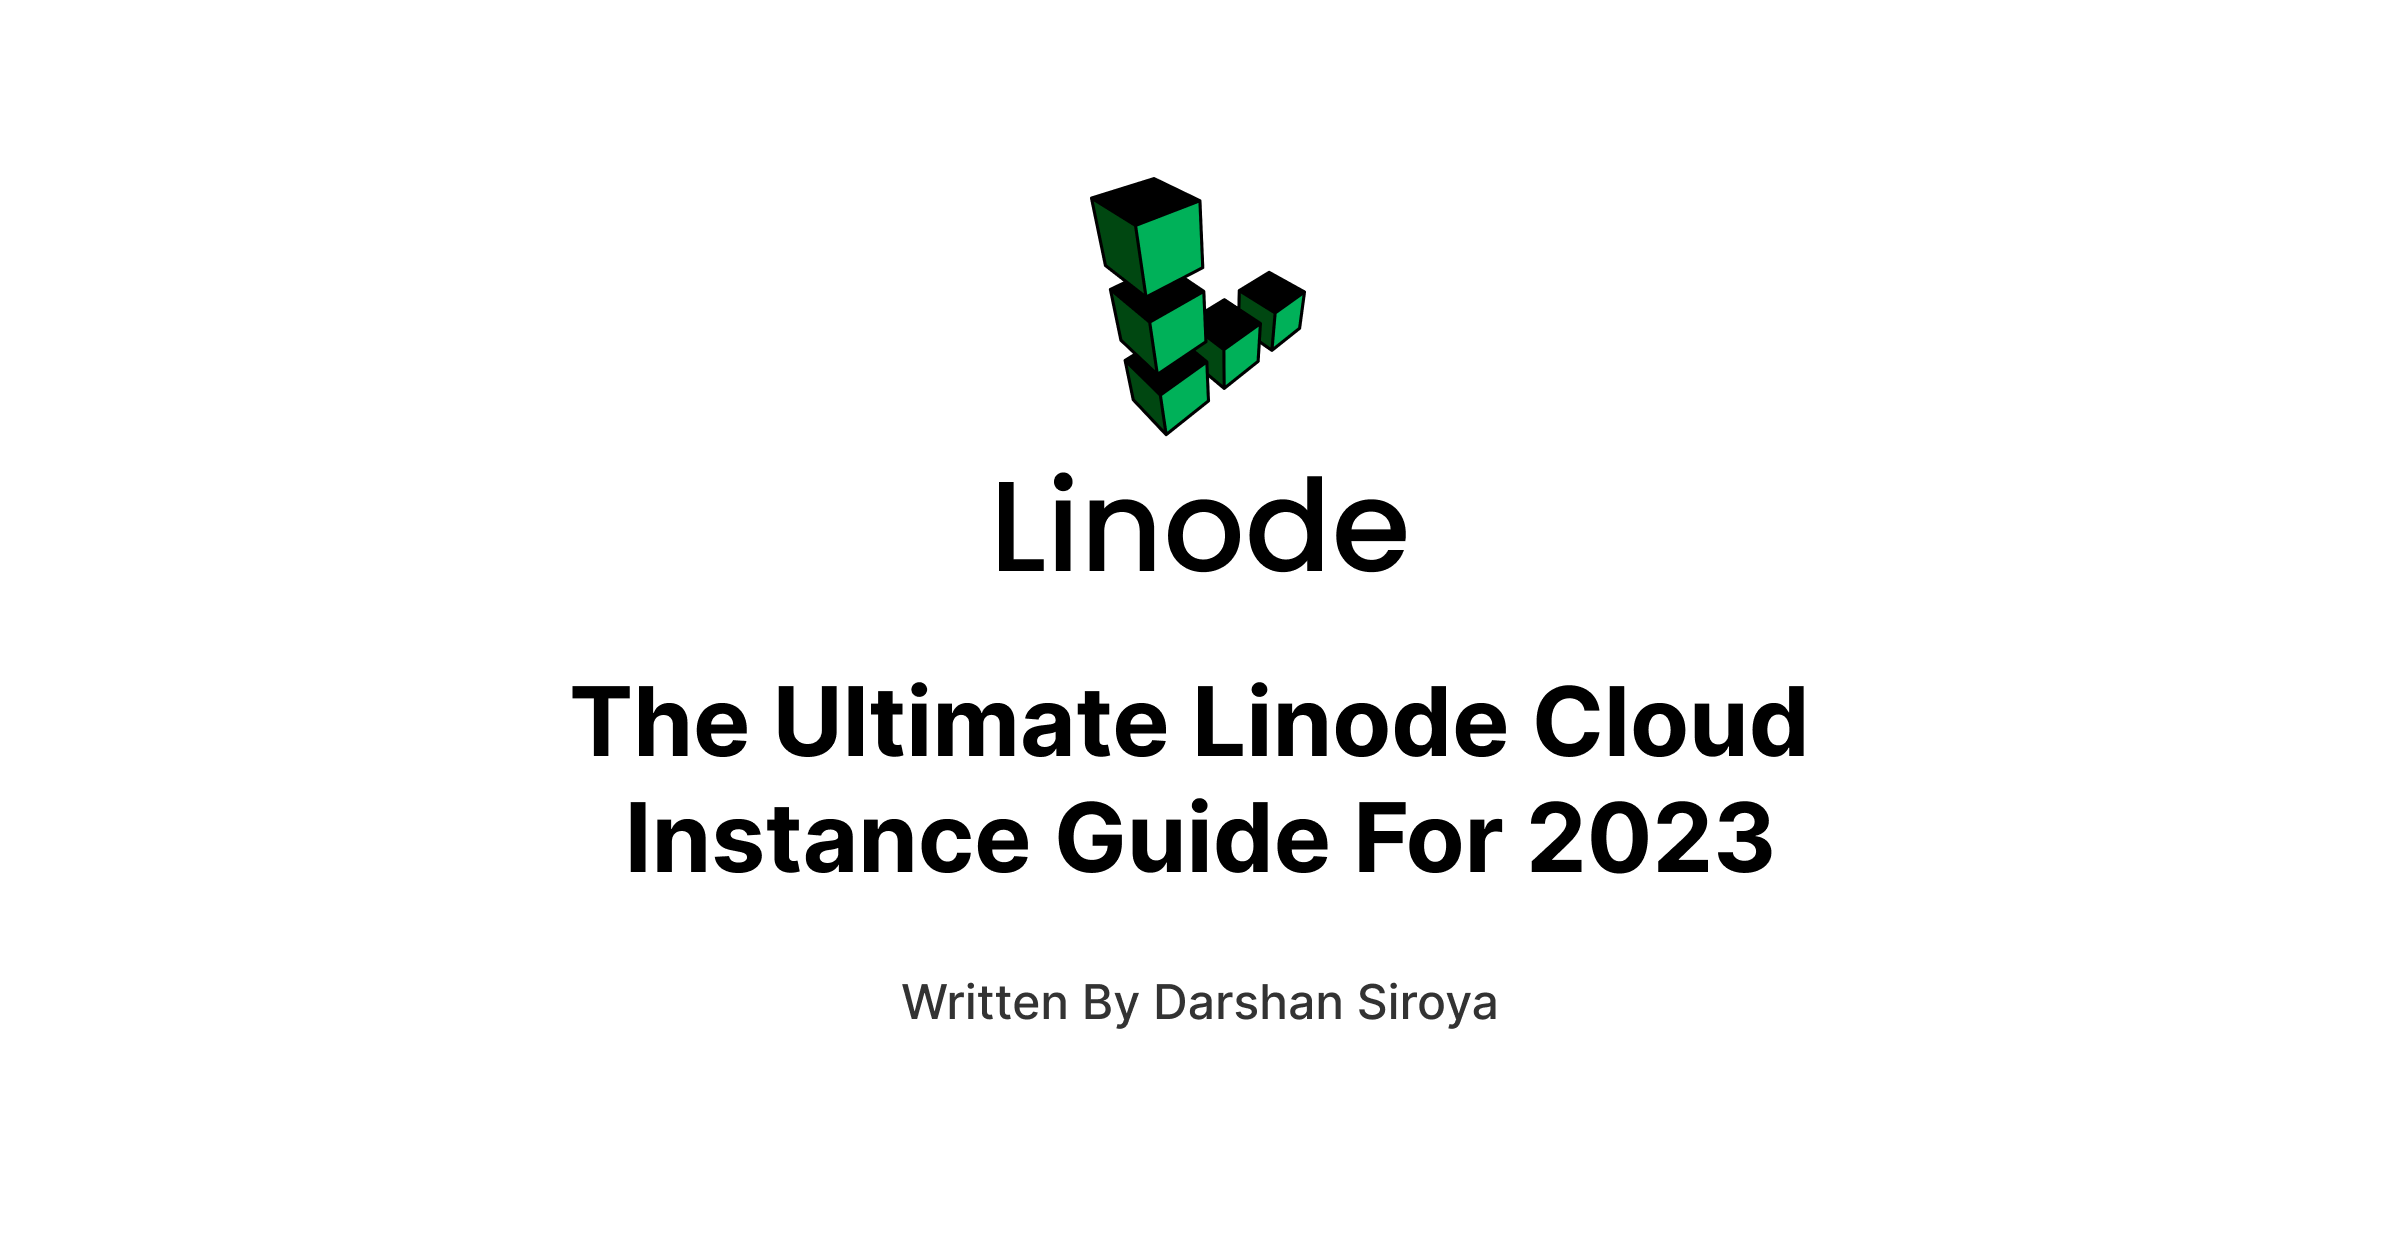 The Ultimate Linode Cloud Instance Guide for 2023